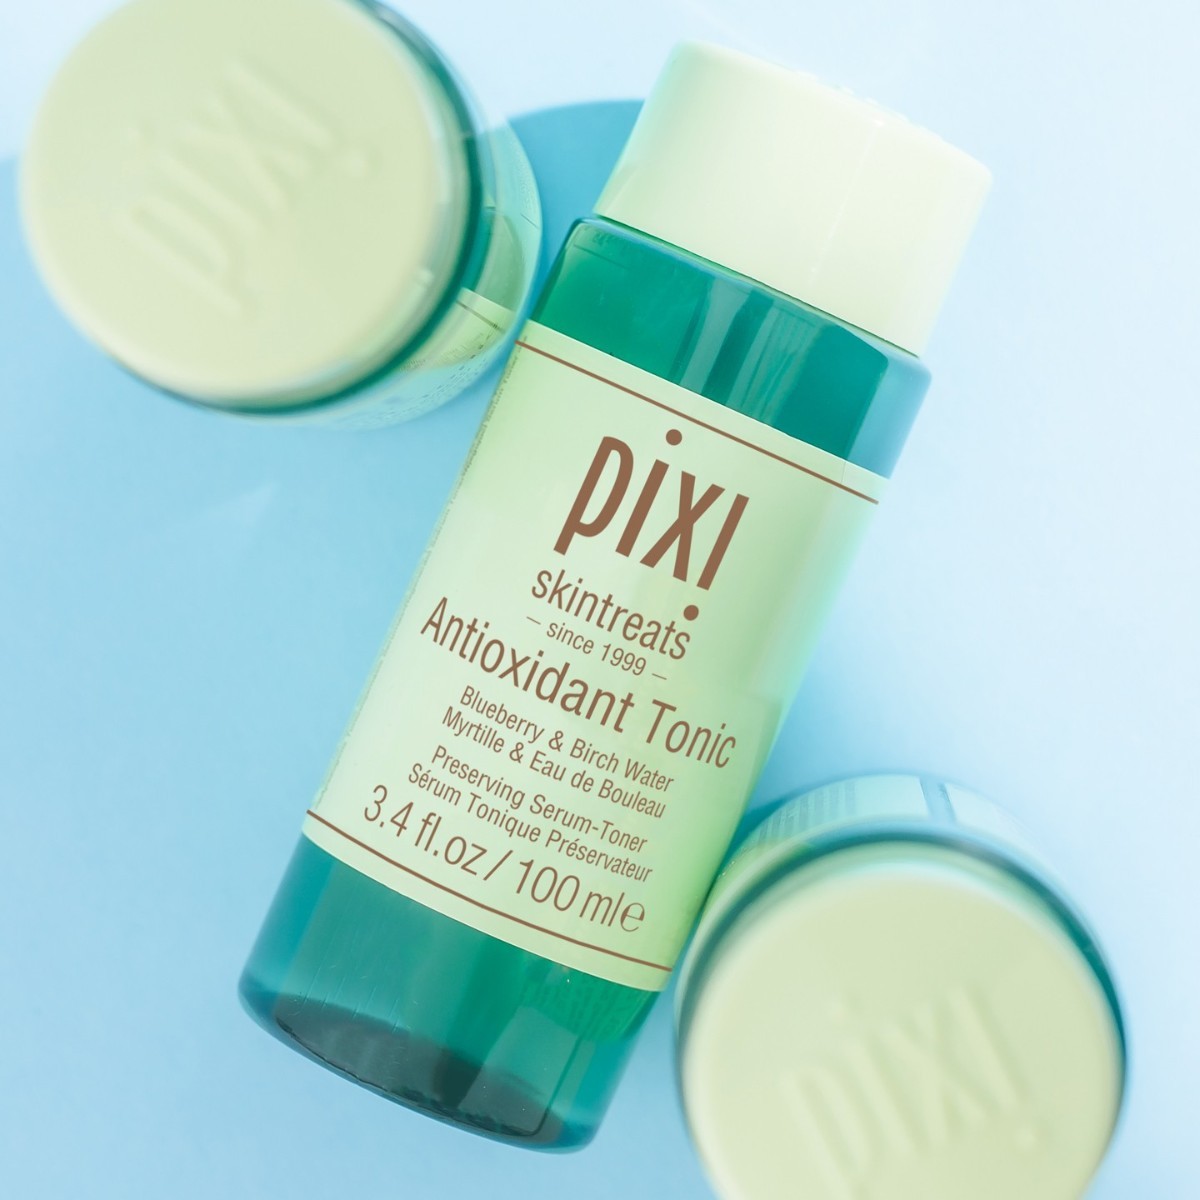 Refresh your skincare routine with a 3-in-1!✨Our Antioxidant Tonic delivers the benefits of a Tonic, essence and serum all wrapped into one! Discover the effects of Birch Water, Probiotics and an Antioxidant-packed blend of Nordic Superfood Berries!🌿 #PixiBeauty #Skincare